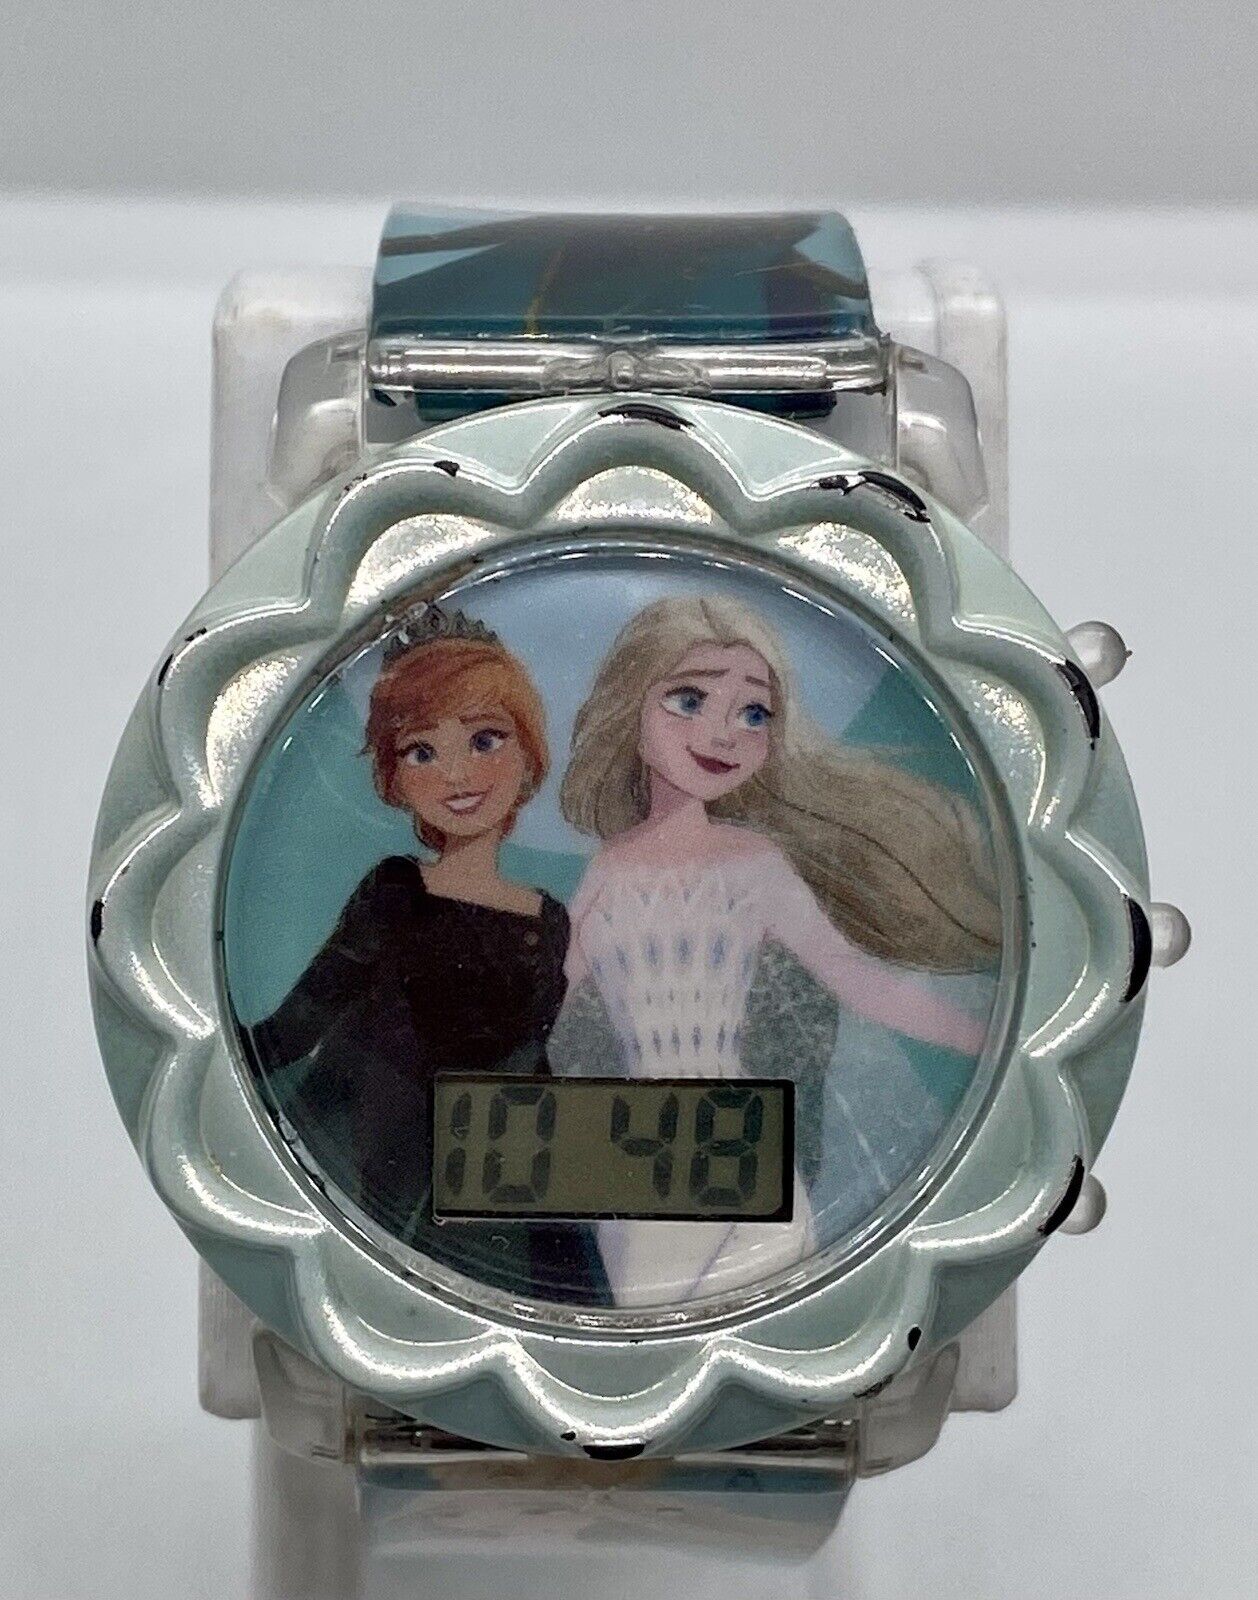 DISNEY ACCUTIME Watch New Batteries Time/DayDate Awesome Lights Frozen Anna Elsa